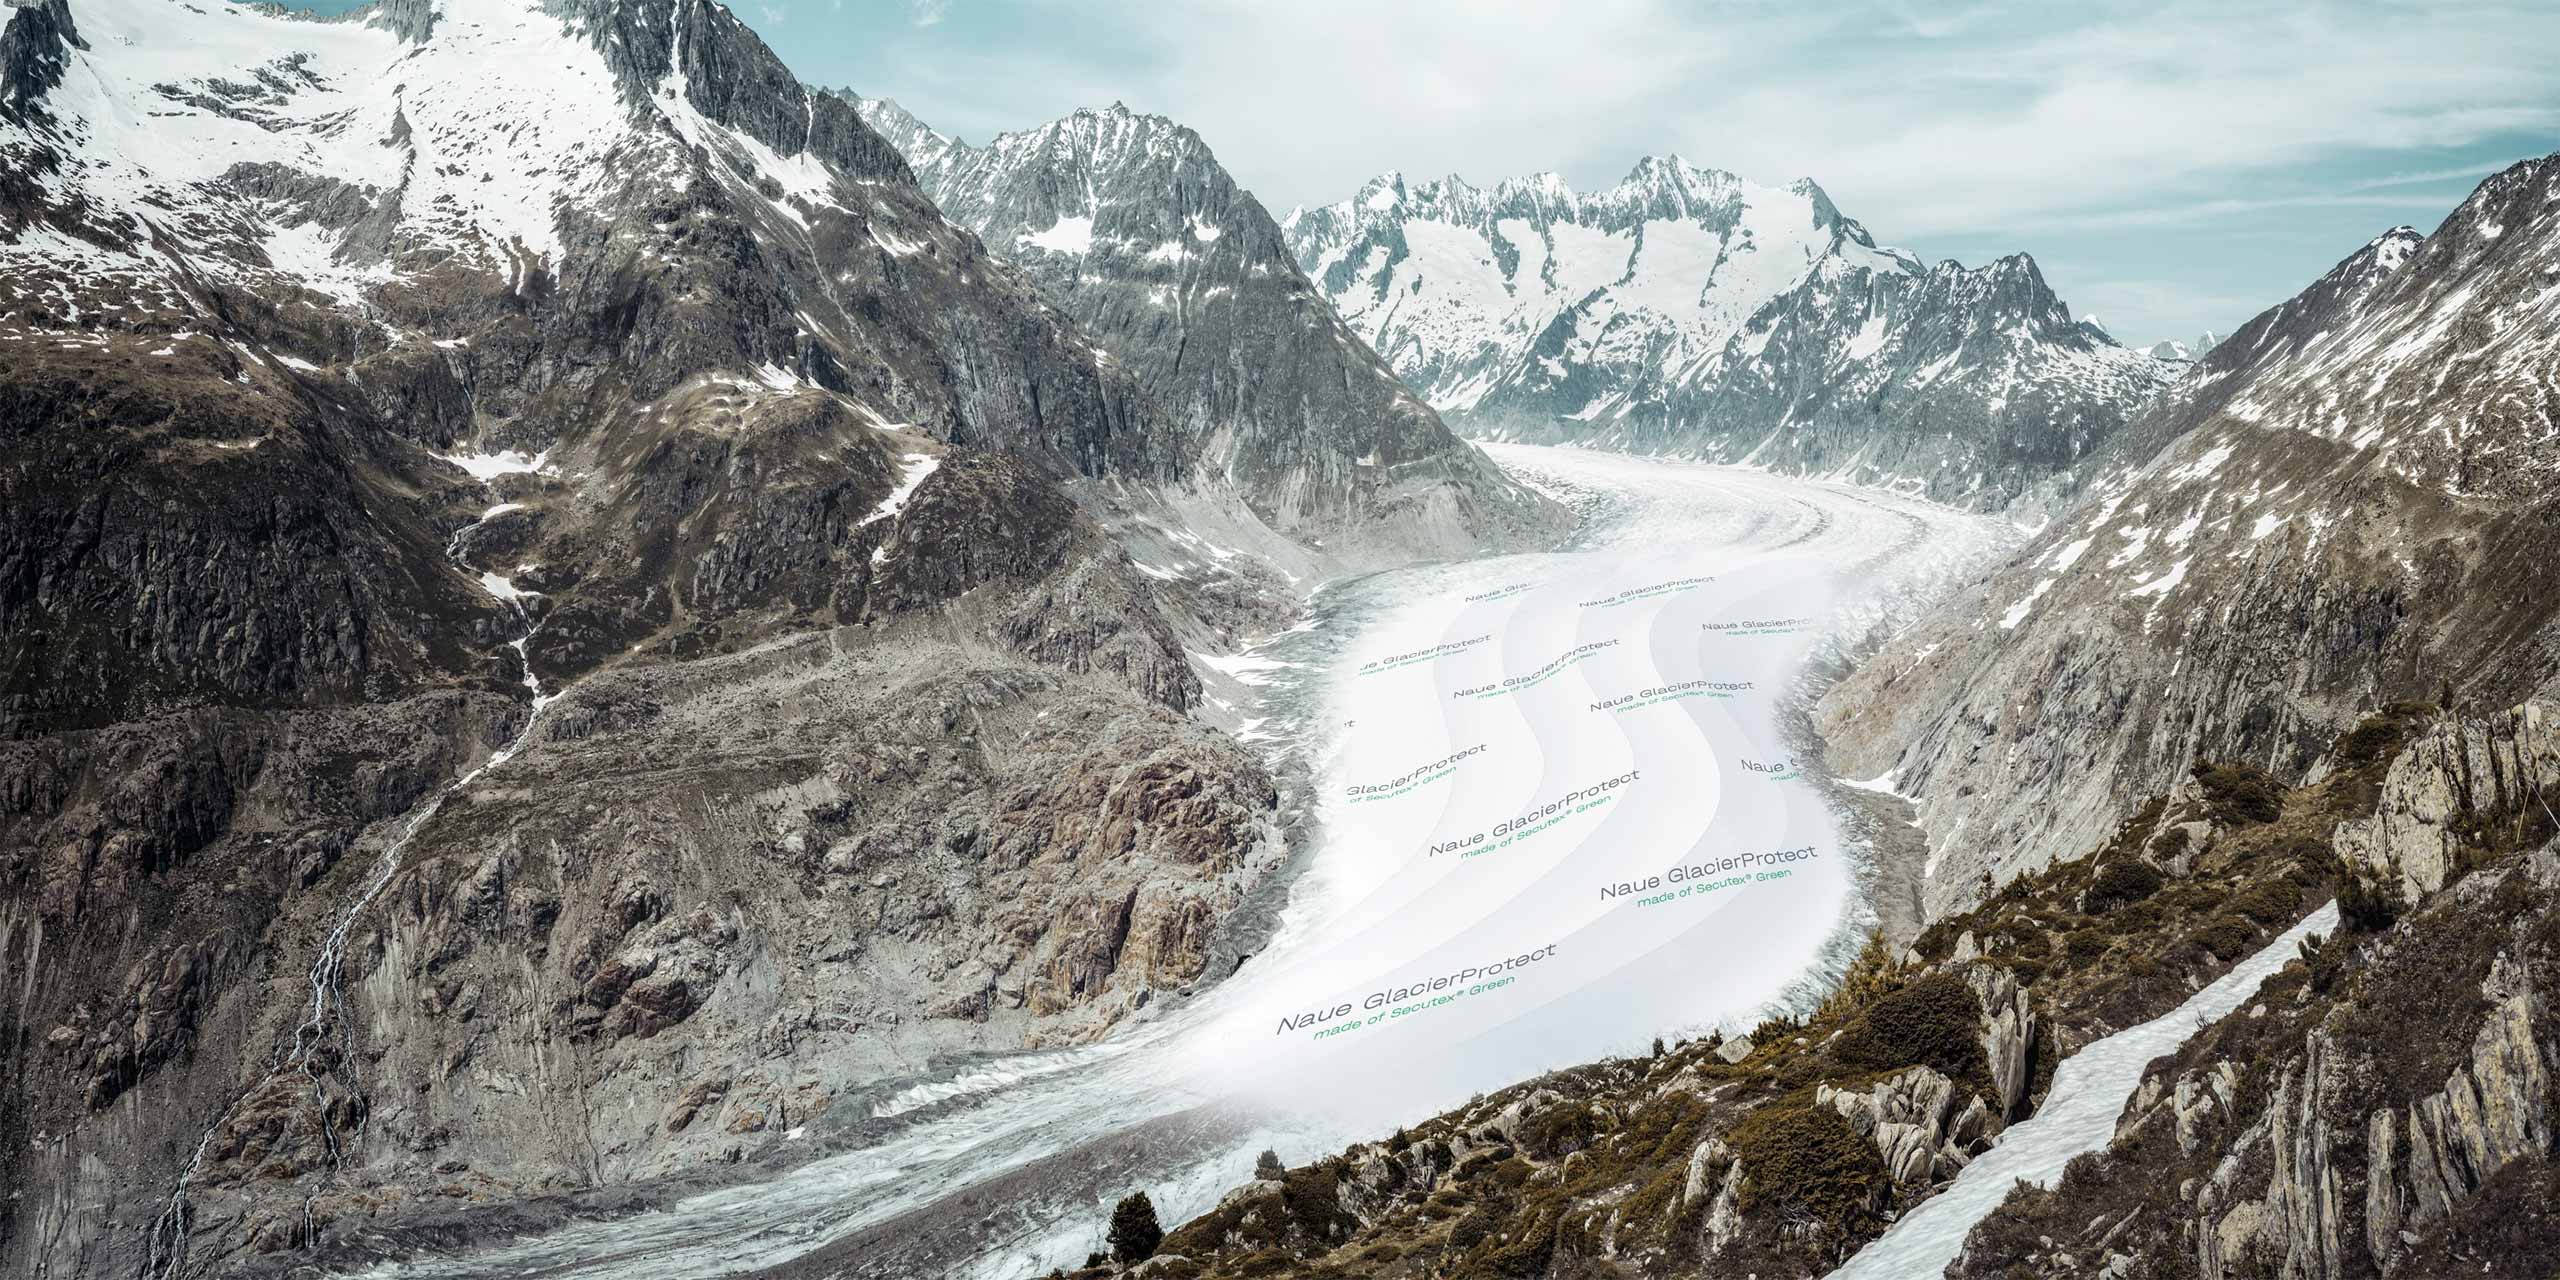 The sustainable solution for protecting glaciers, snowfields and ski facilities